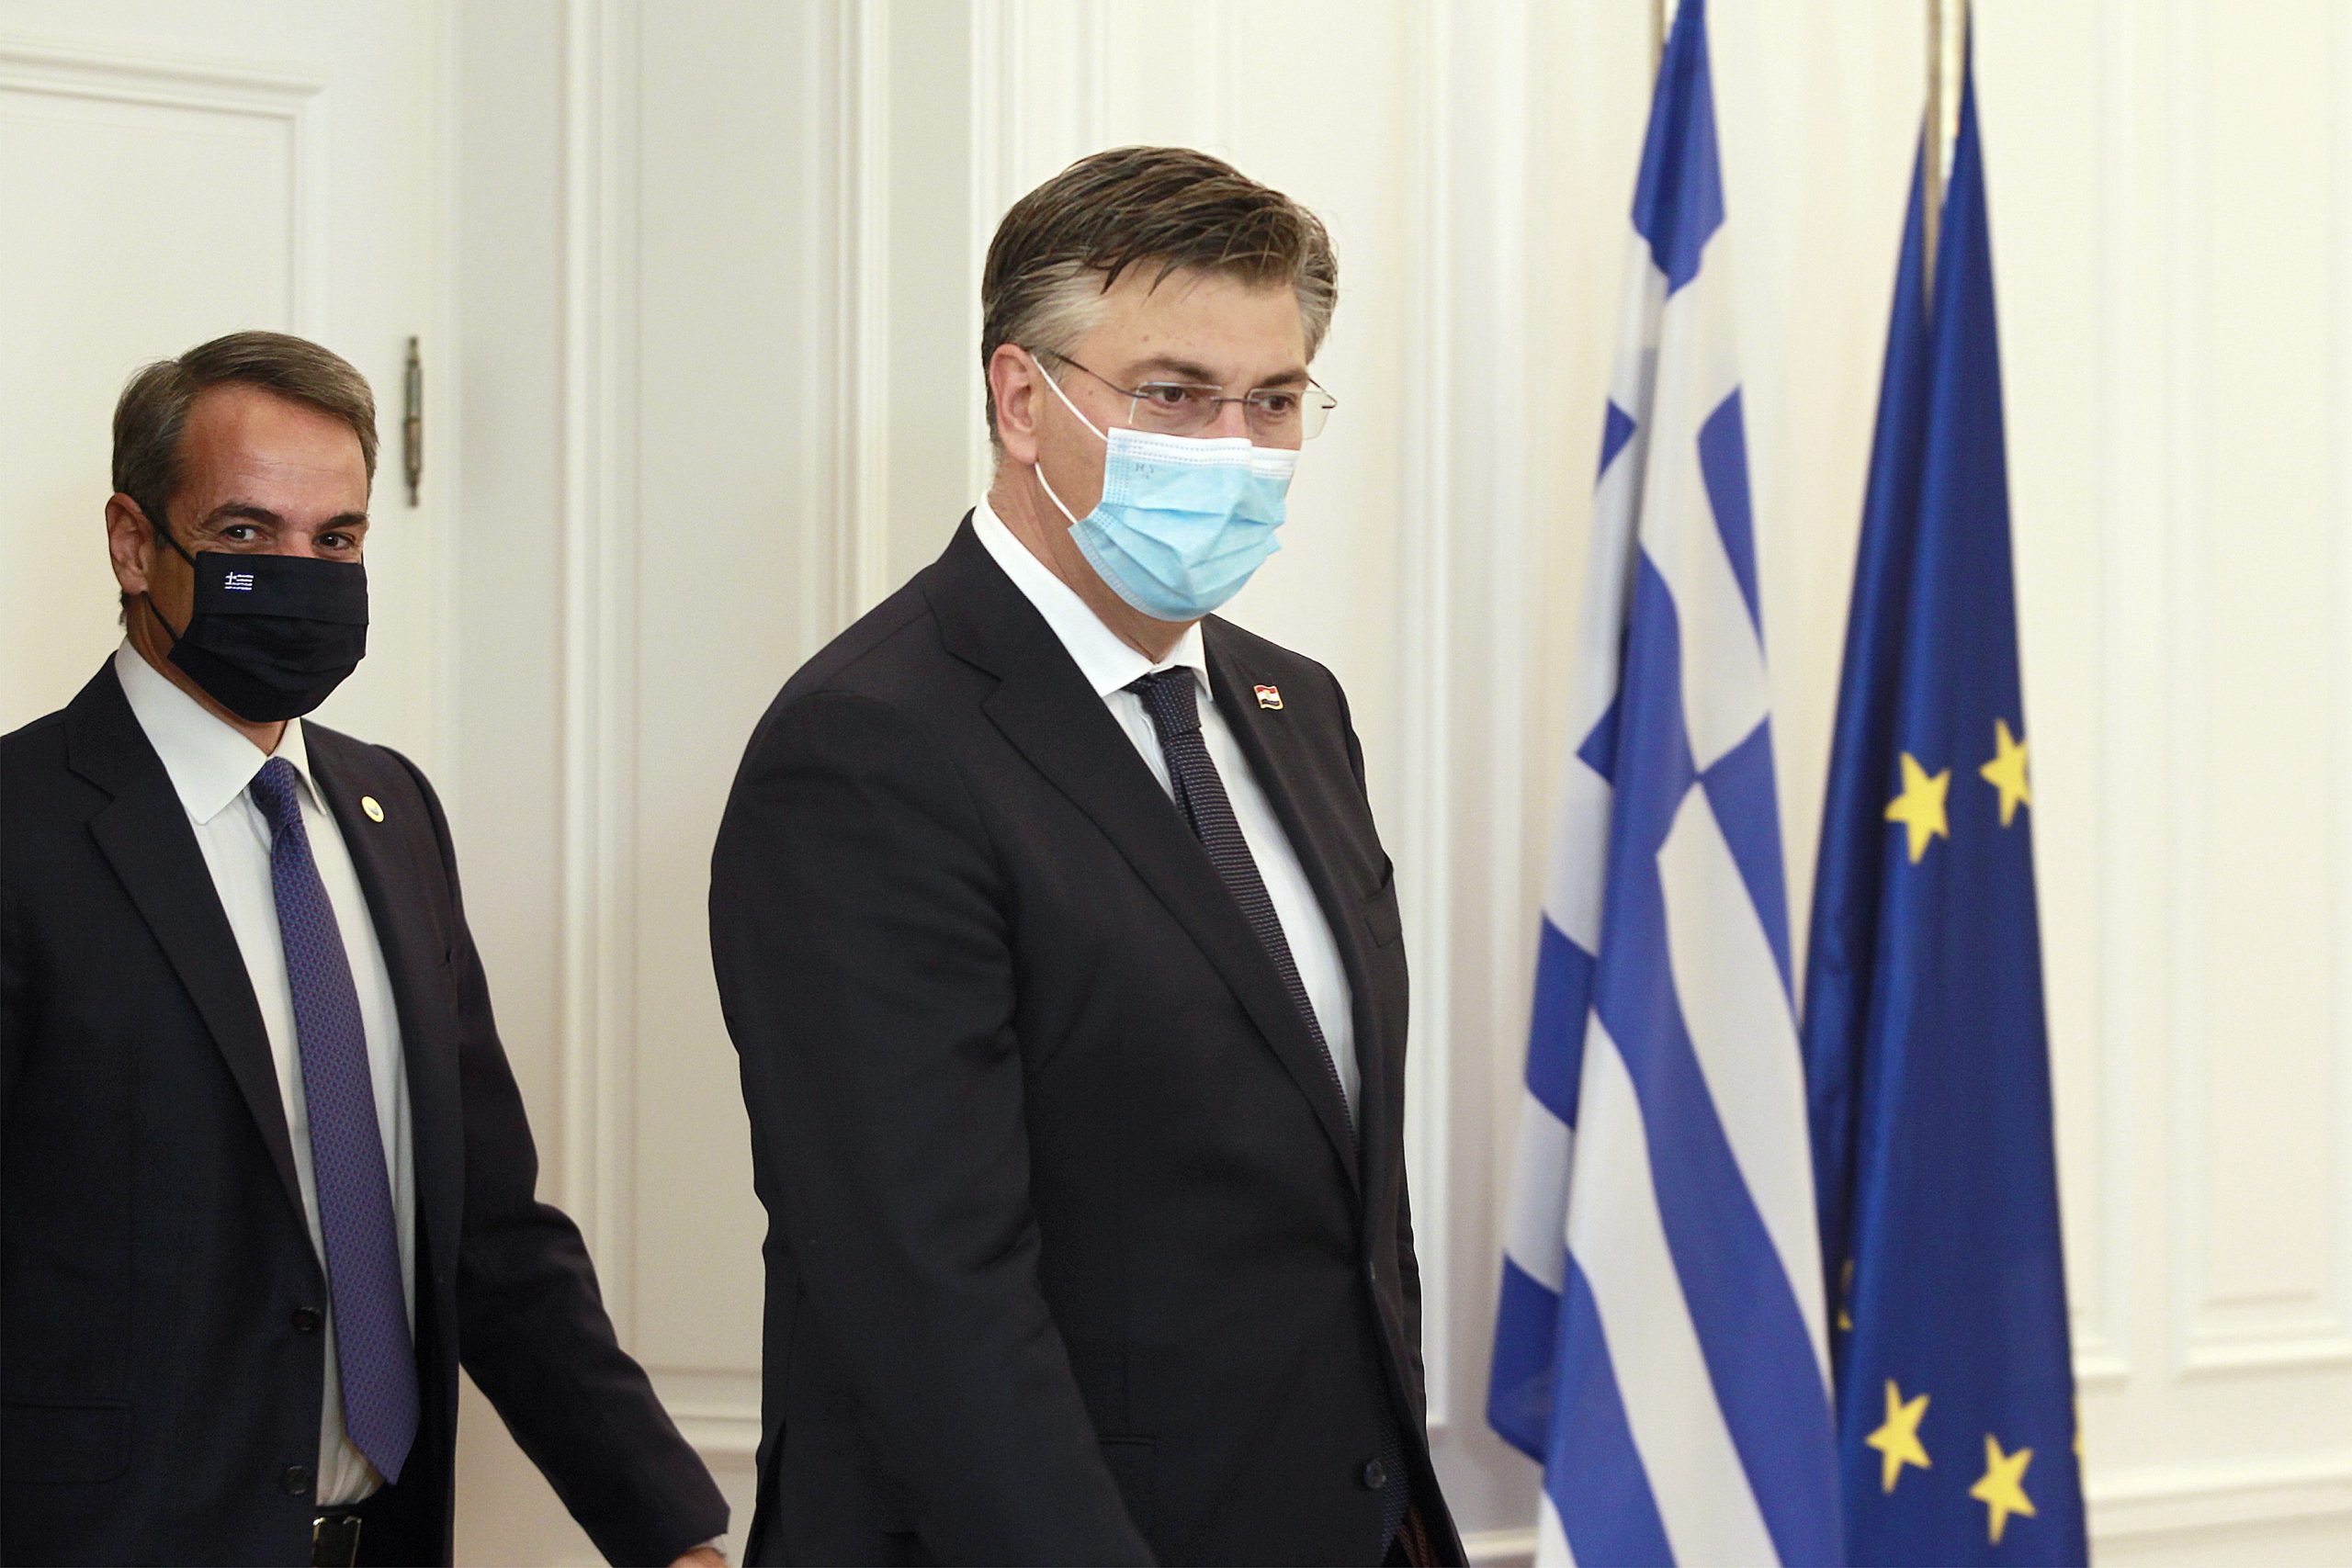 epa09472951 Greek Prime Minister Kyriakos Mitsotakis (L) talks with the Prime Minister of Croatia Andrej Plenkovic (R) during their meeting at the Maximou Mansion in Athens, Greece, 17 September 2021. Croatian Prime Minister Andrej Plenkovic will participate at the EUMed 9 Summit, TO be held on Friday in Athens, at the Stavros Niarchos Foundation Culture Centre (SNFCC).  EPA/ALEXANDROS VLACHOS